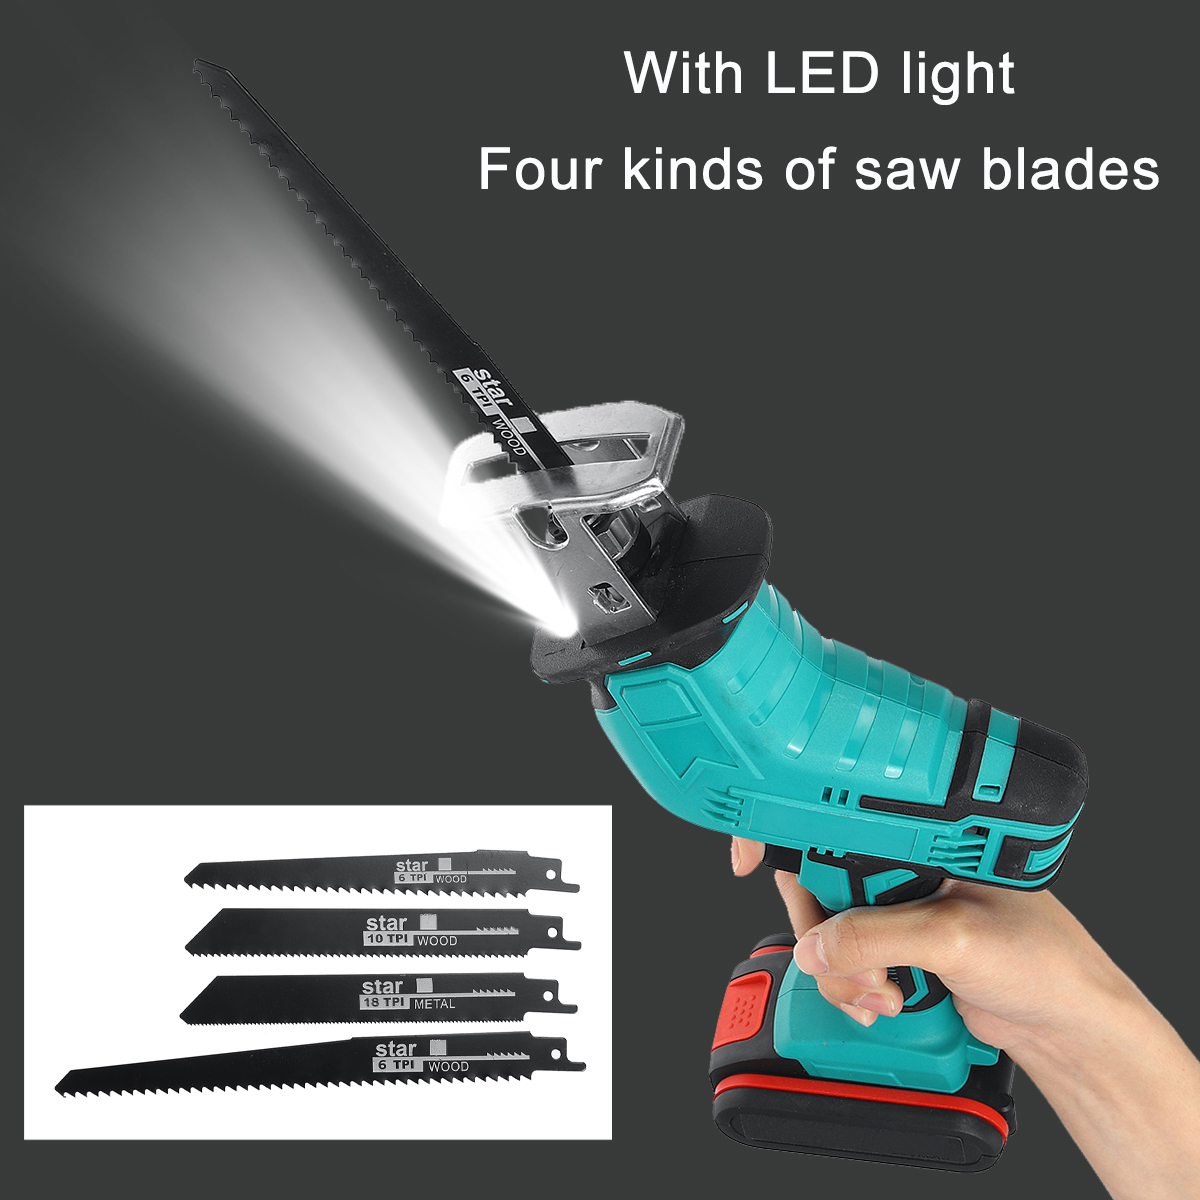 138VF-Rechargeable-Electric-Handheld-Saw-With-LED-4-Saw-Blades-Wood-Cutting-Tool-W-None1pc2pcs-Batte-1827869-3